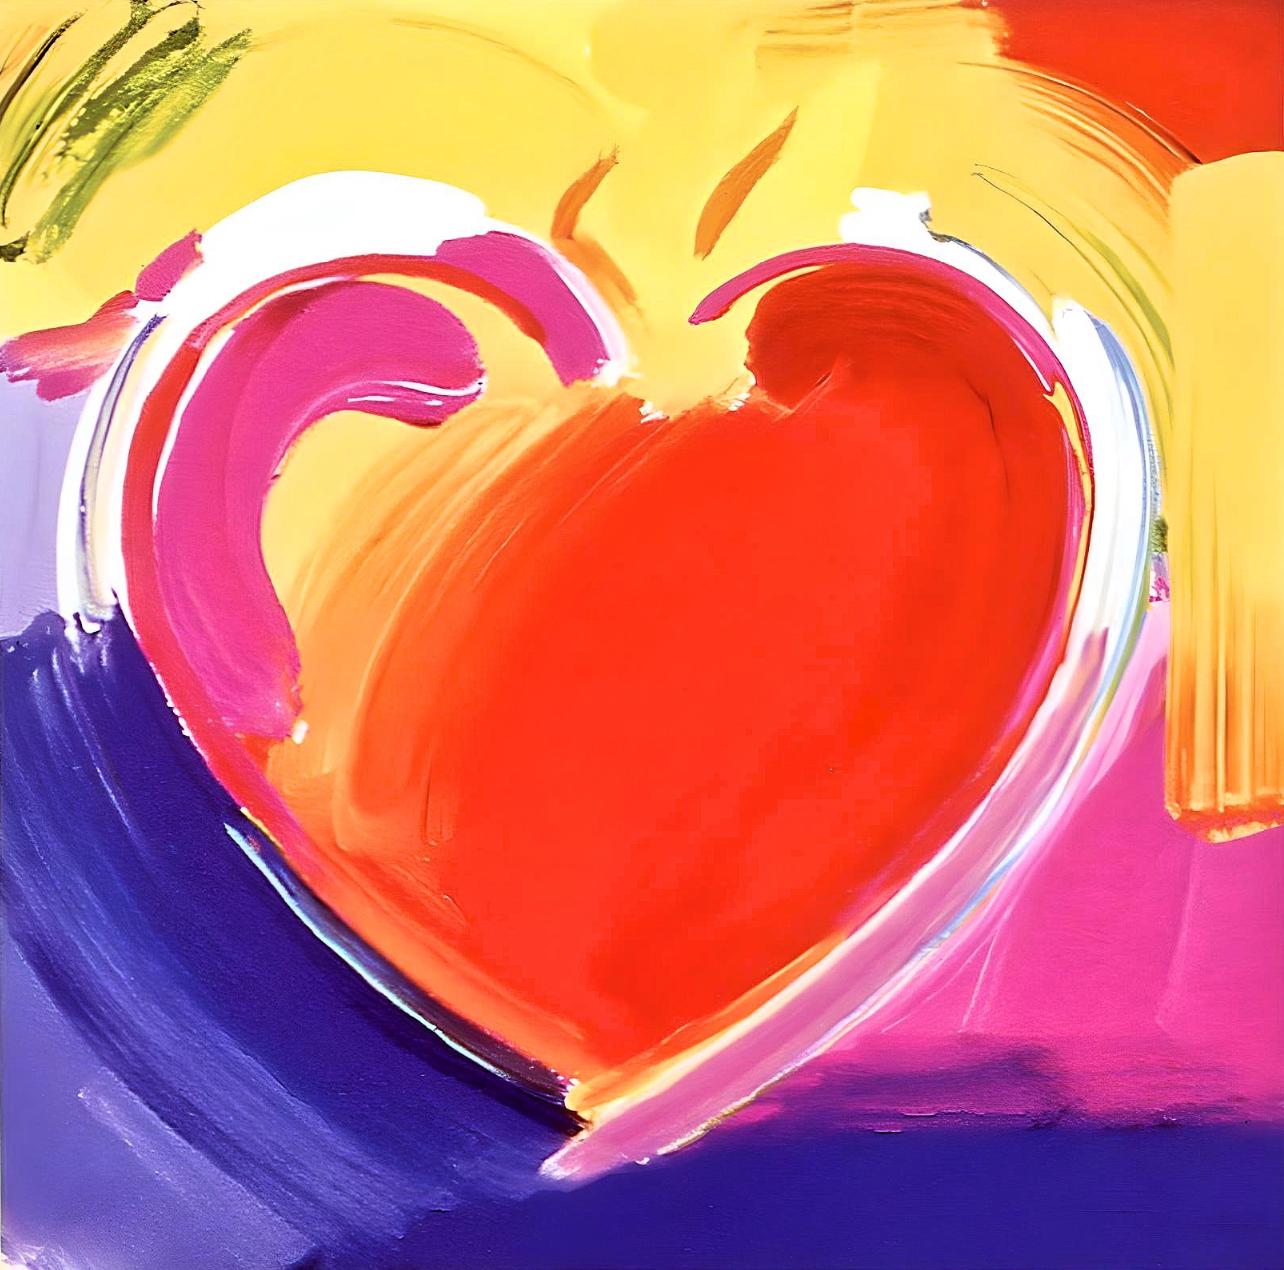 Heart on Blends, Peter Max 2